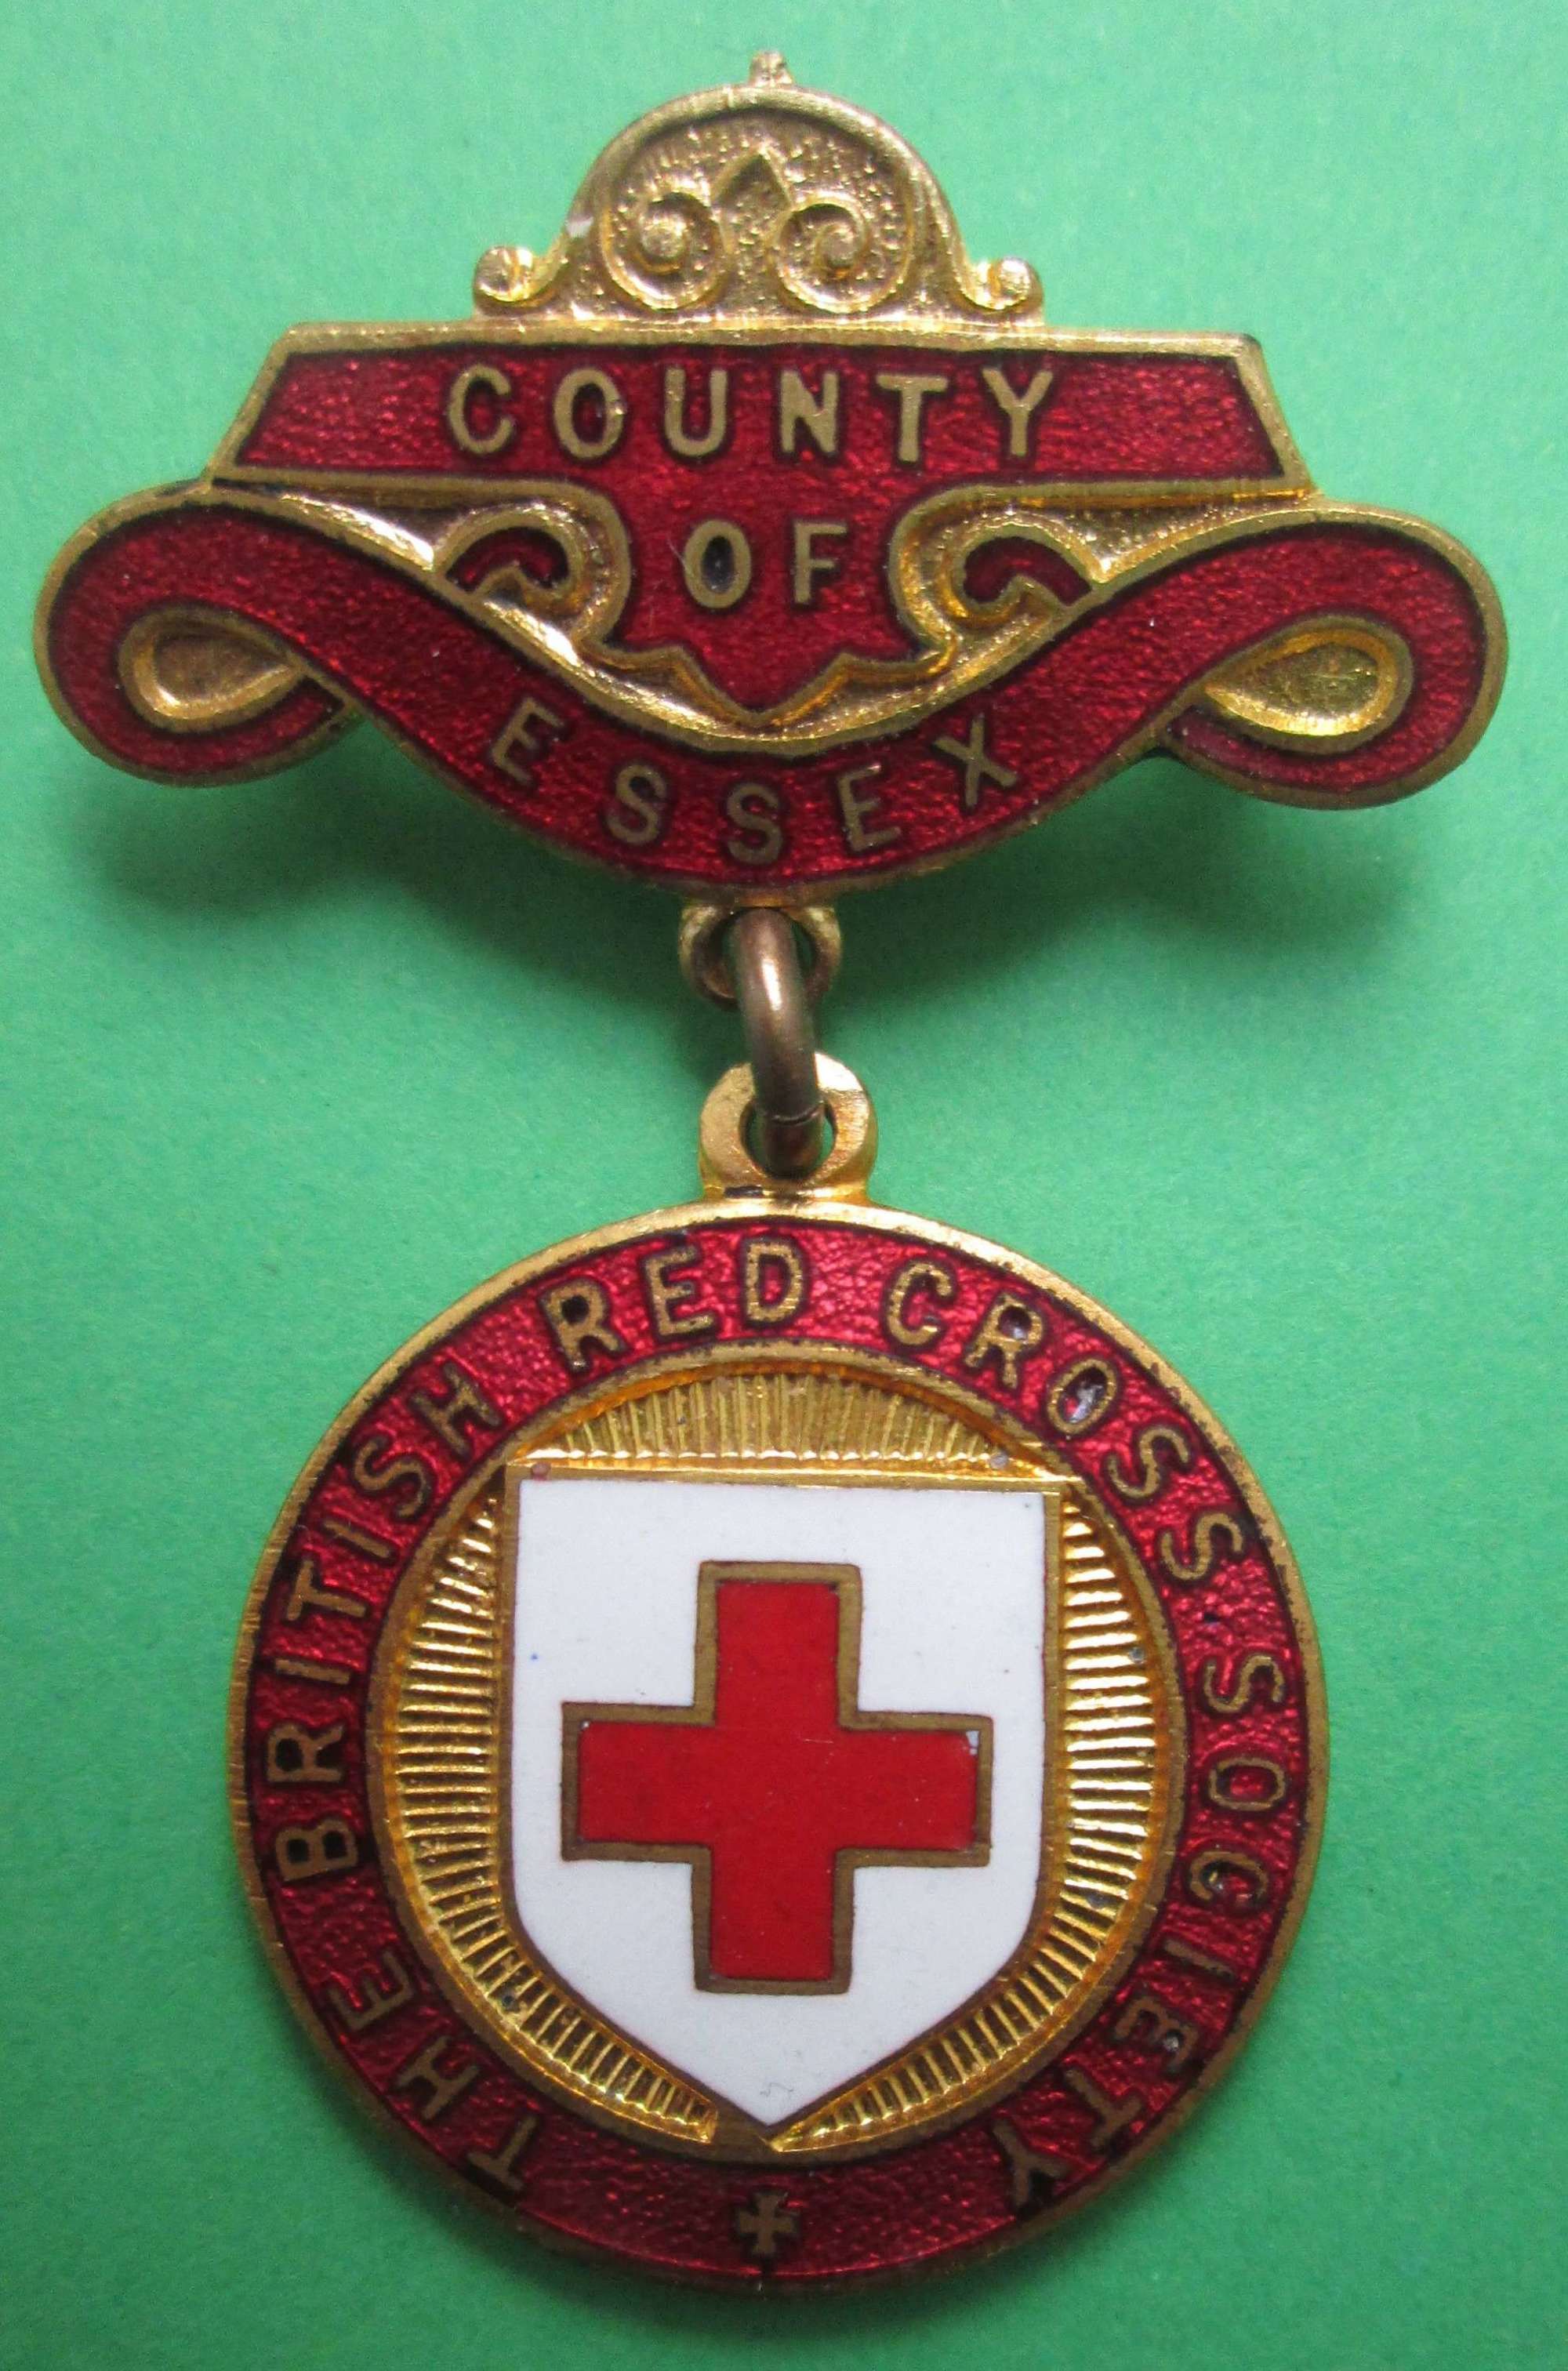 A COUNTY OF ESSEX BRITISH RED CROSS SOCIETY BADGE